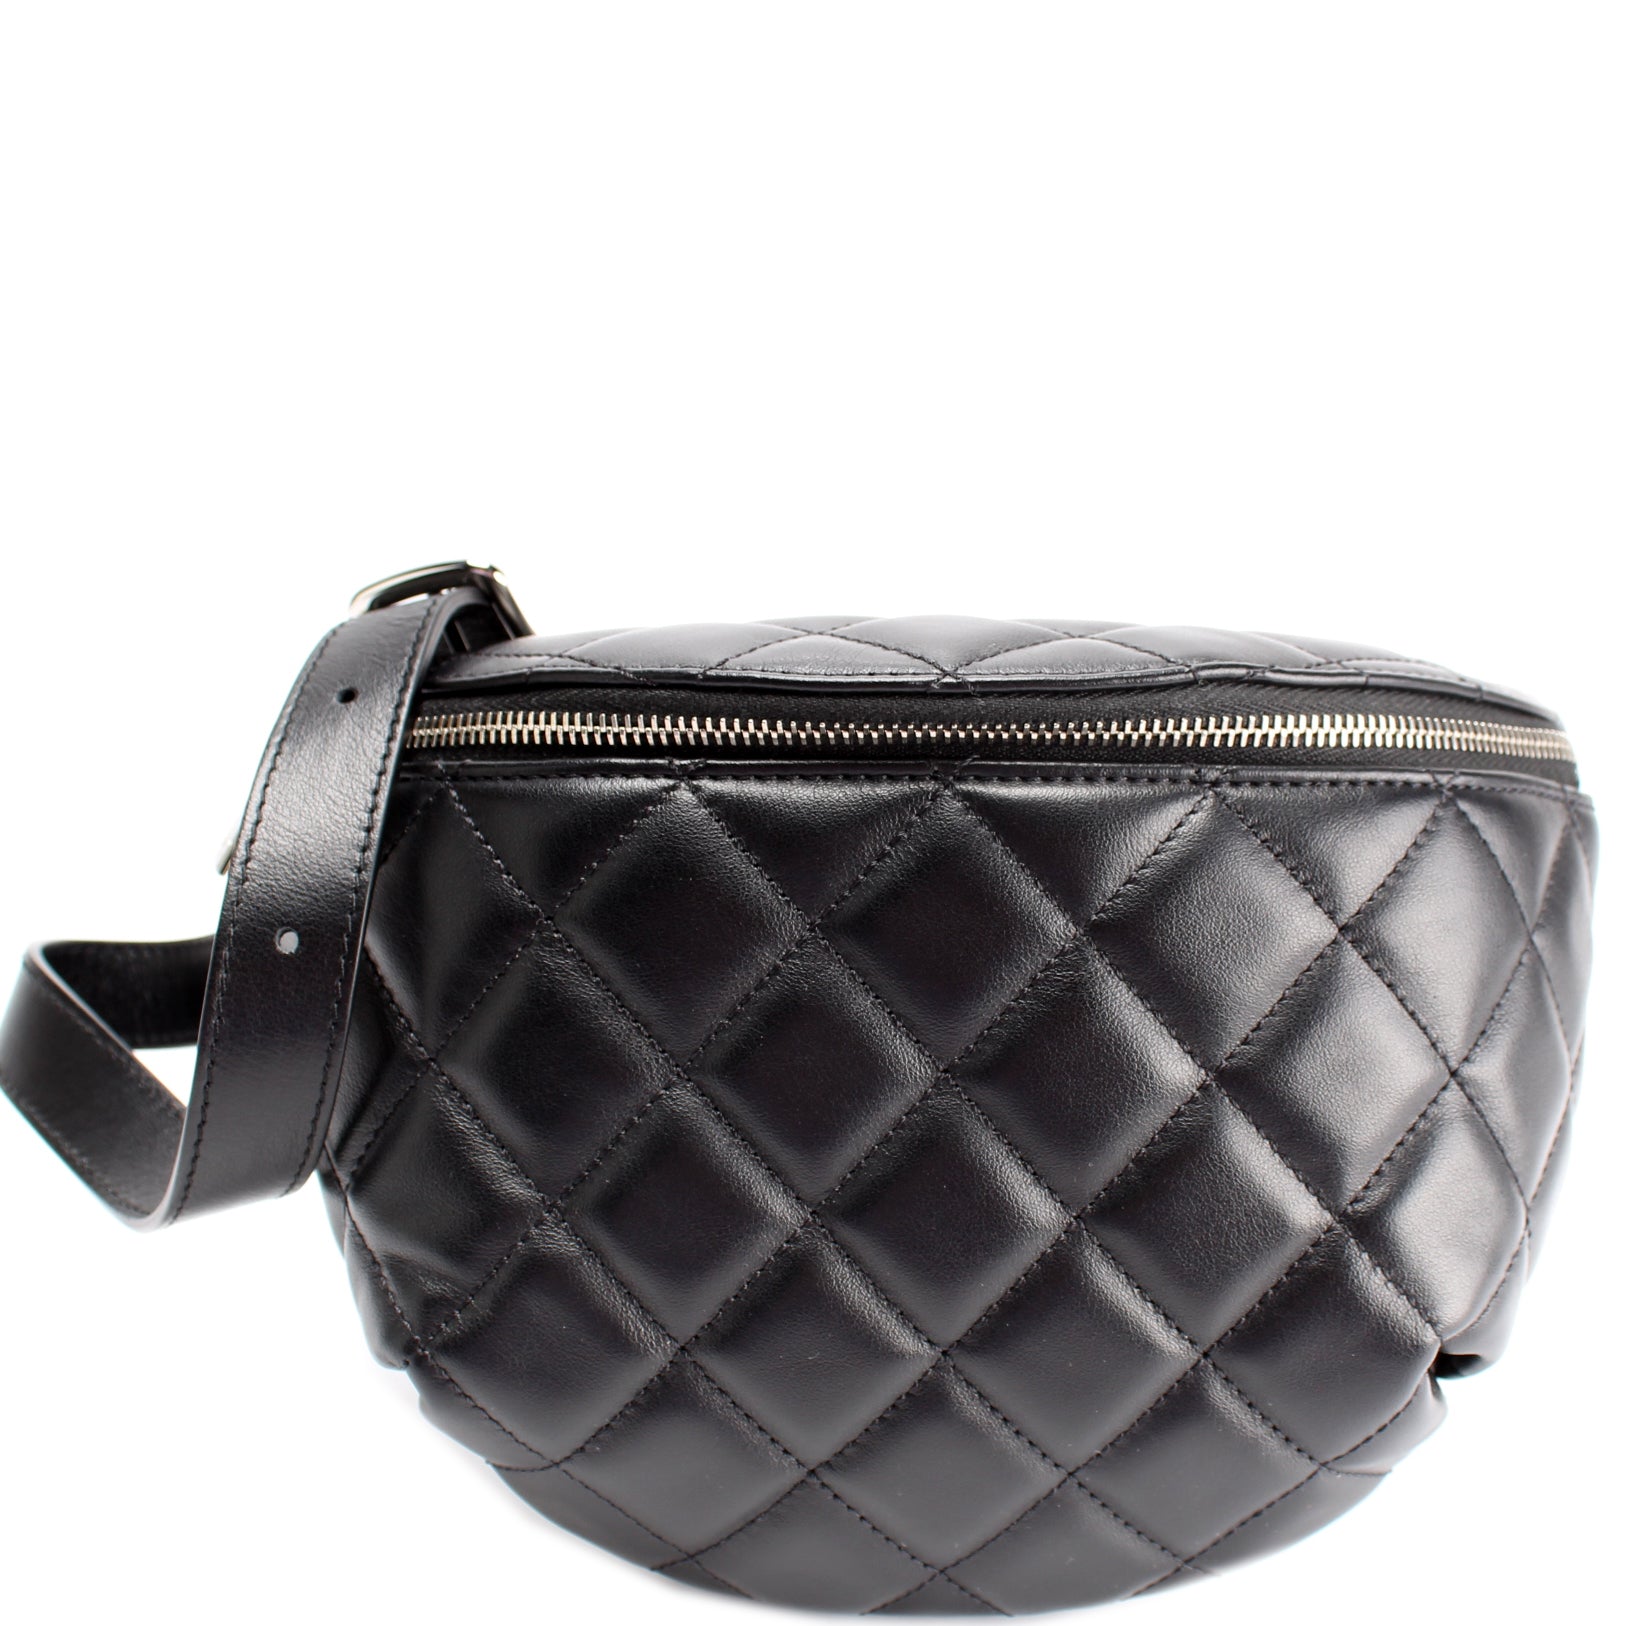 CHANEL, Bags, Chanel Black Leather Bumbag Quilted Uniform Cc Waist Bag  Crossbody Authentic New